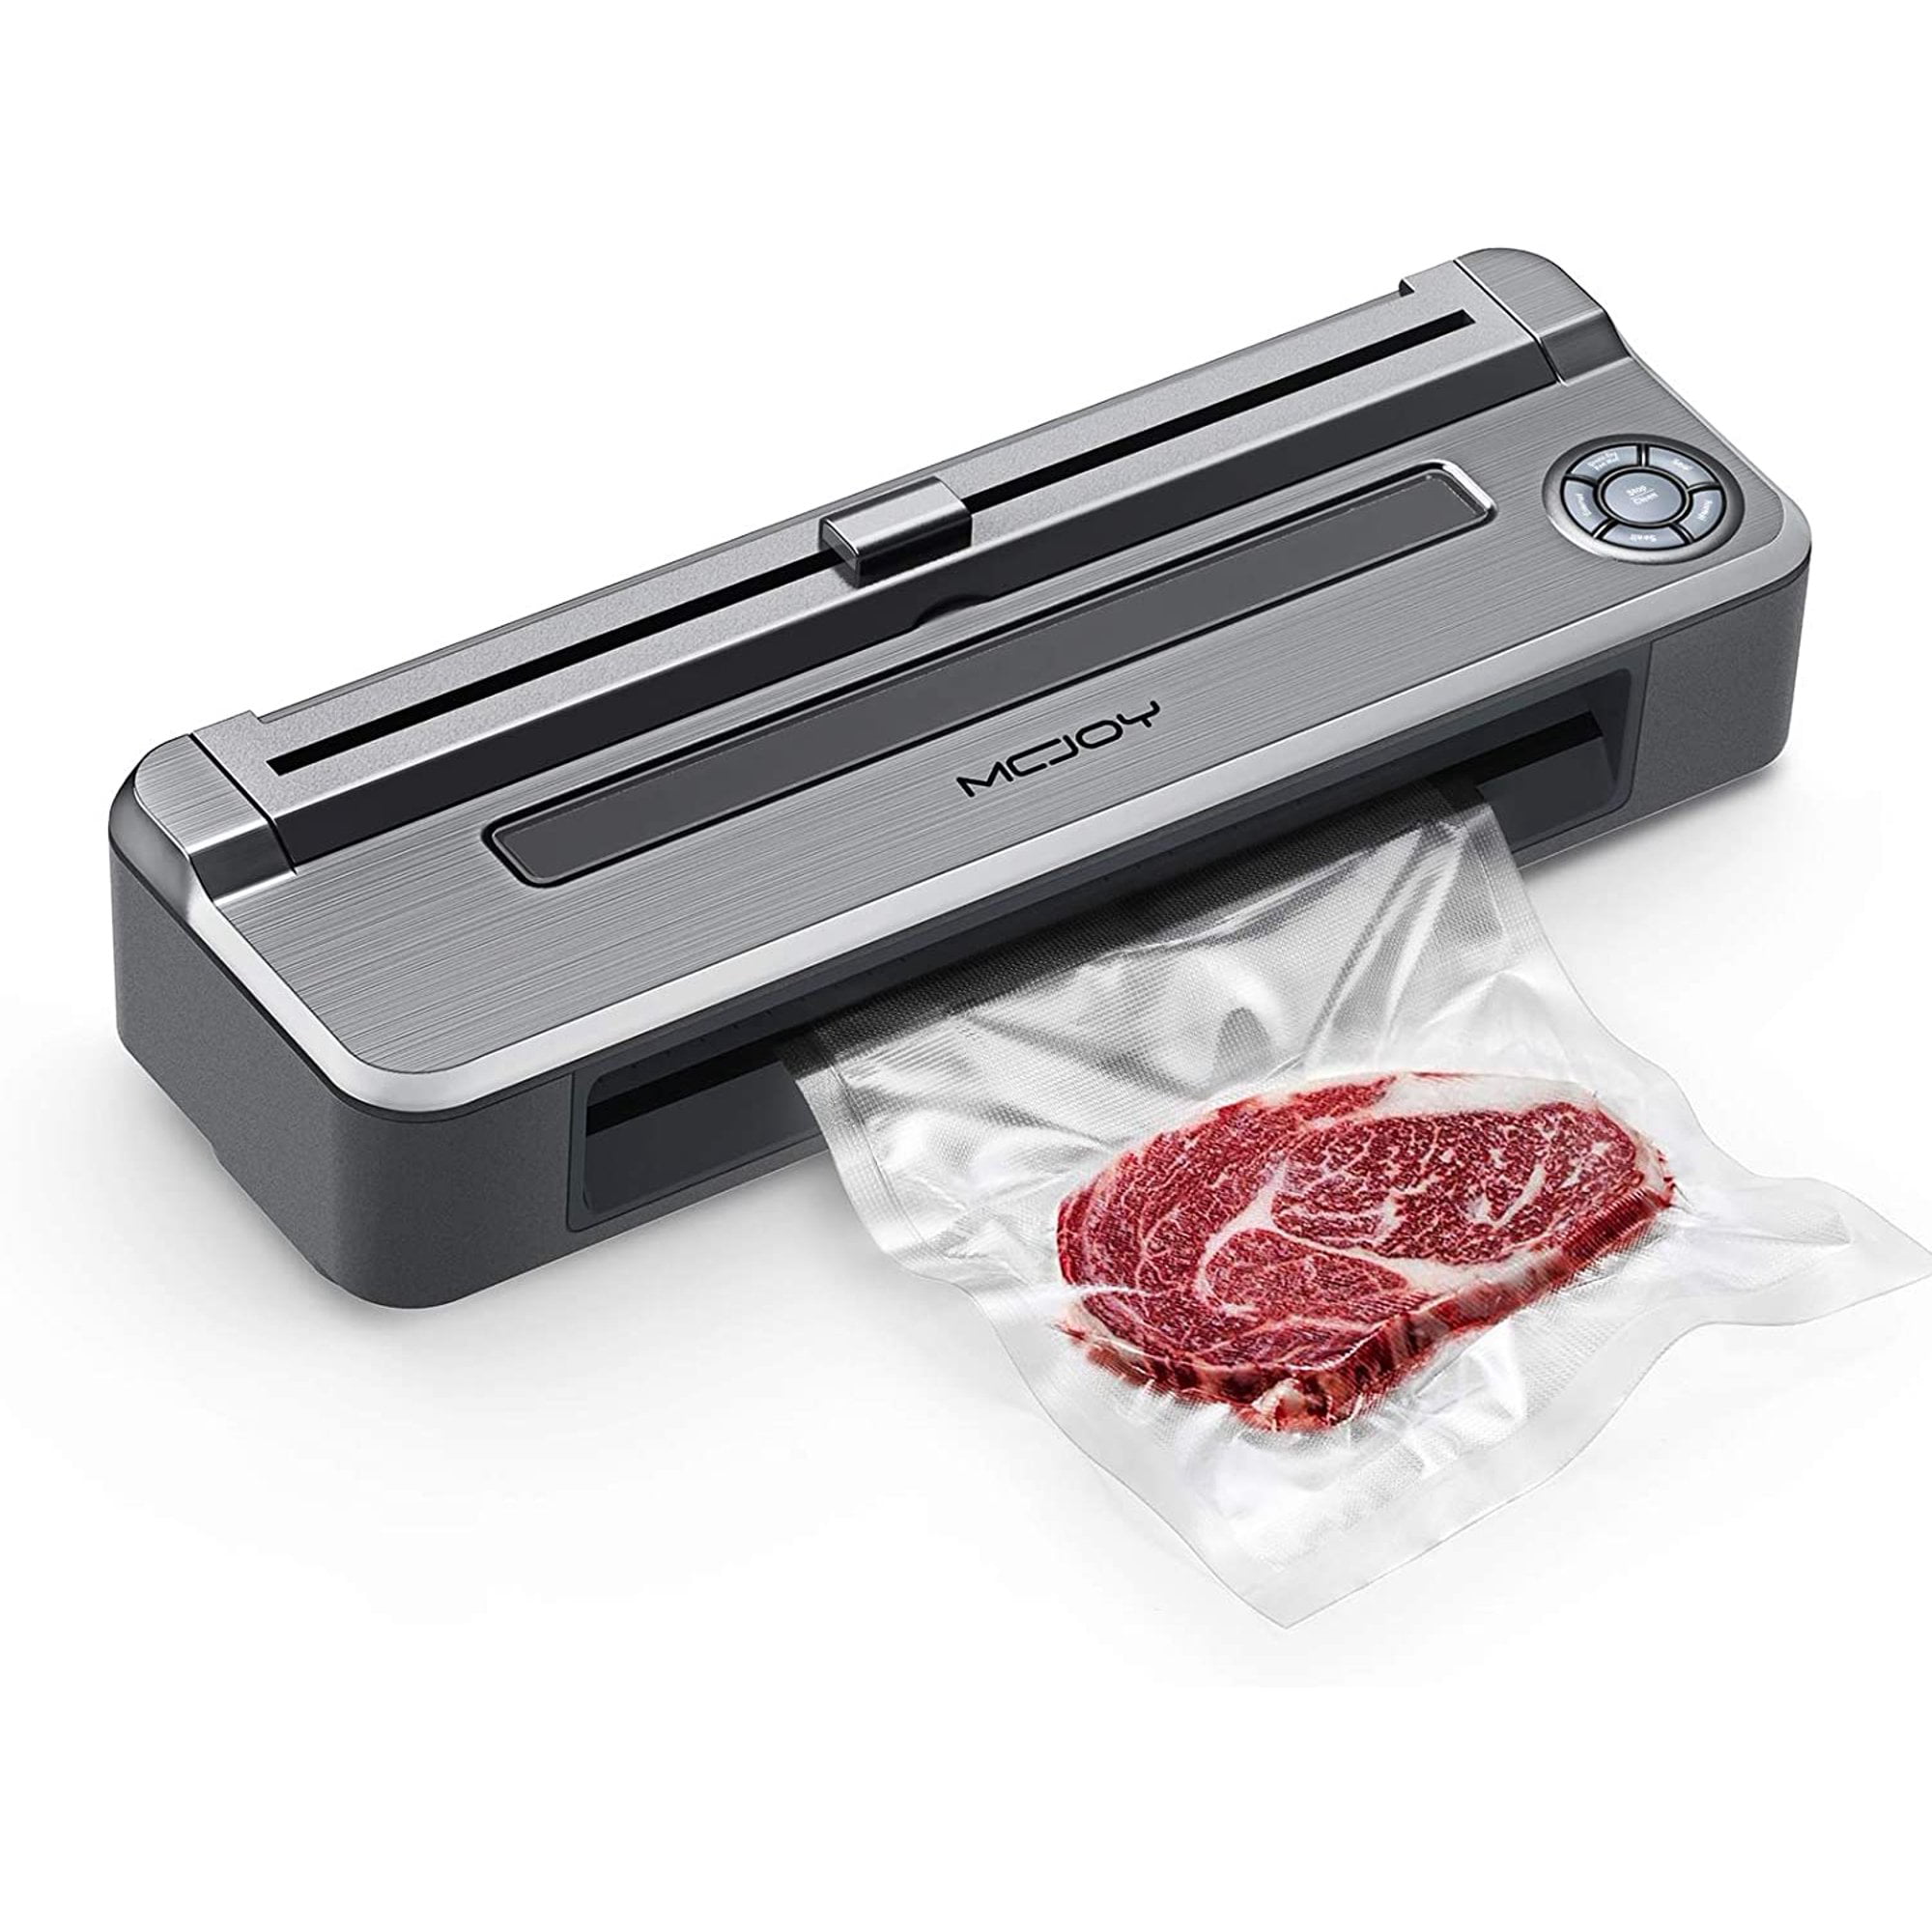 ADVENOR Vacuum Sealer Pro Food Sealer with Built-in Cutter and Bag Sto